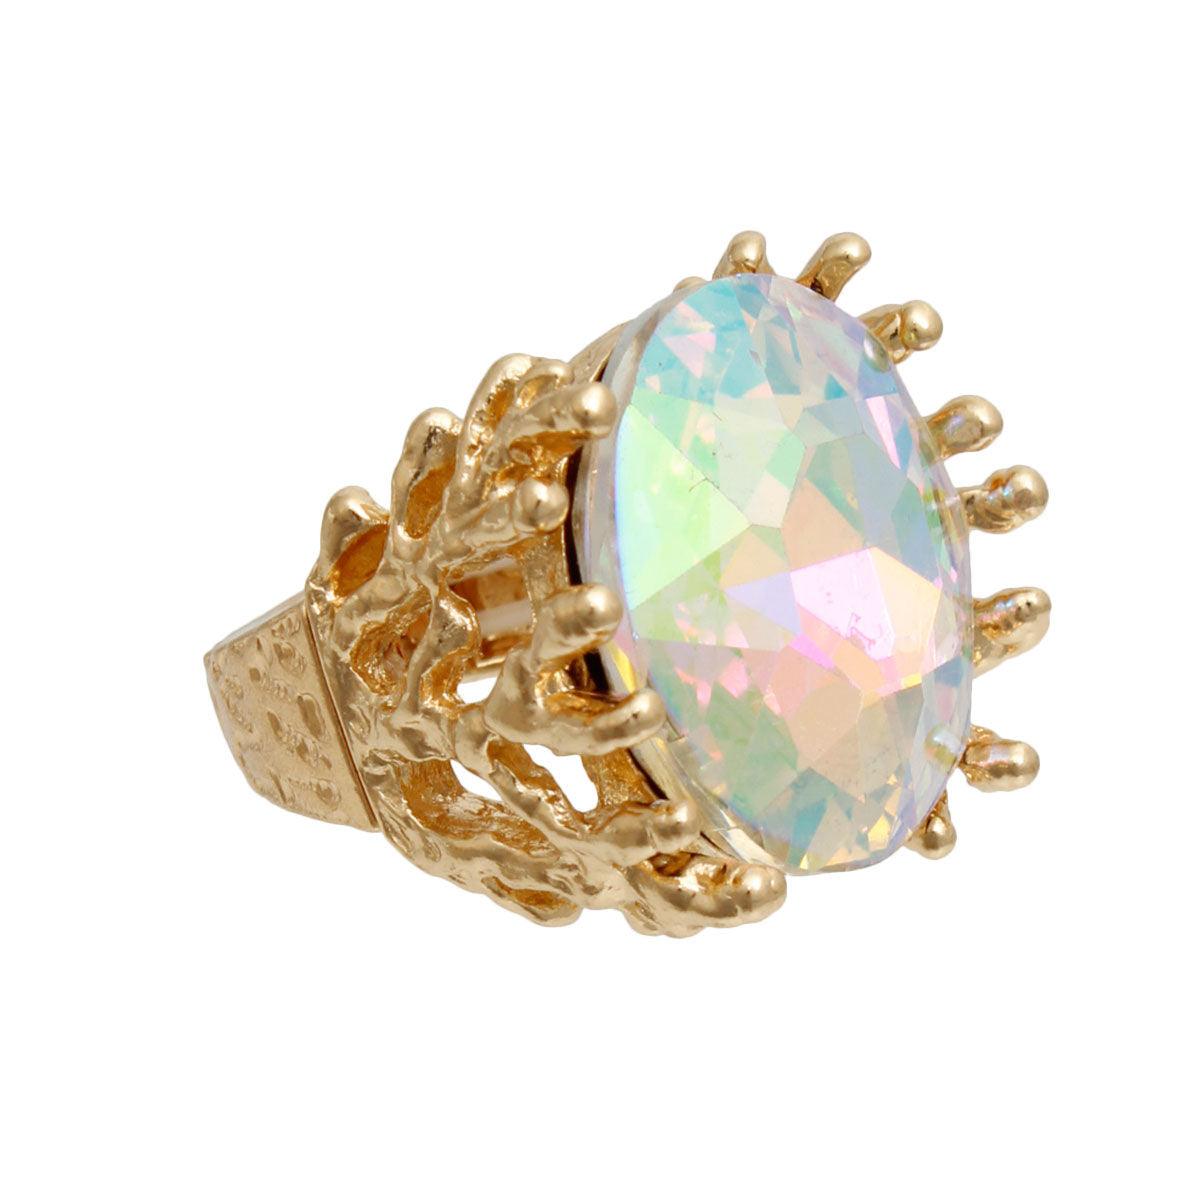 Aurora Borealis Branch Ring: Add Sparkle to Your Style